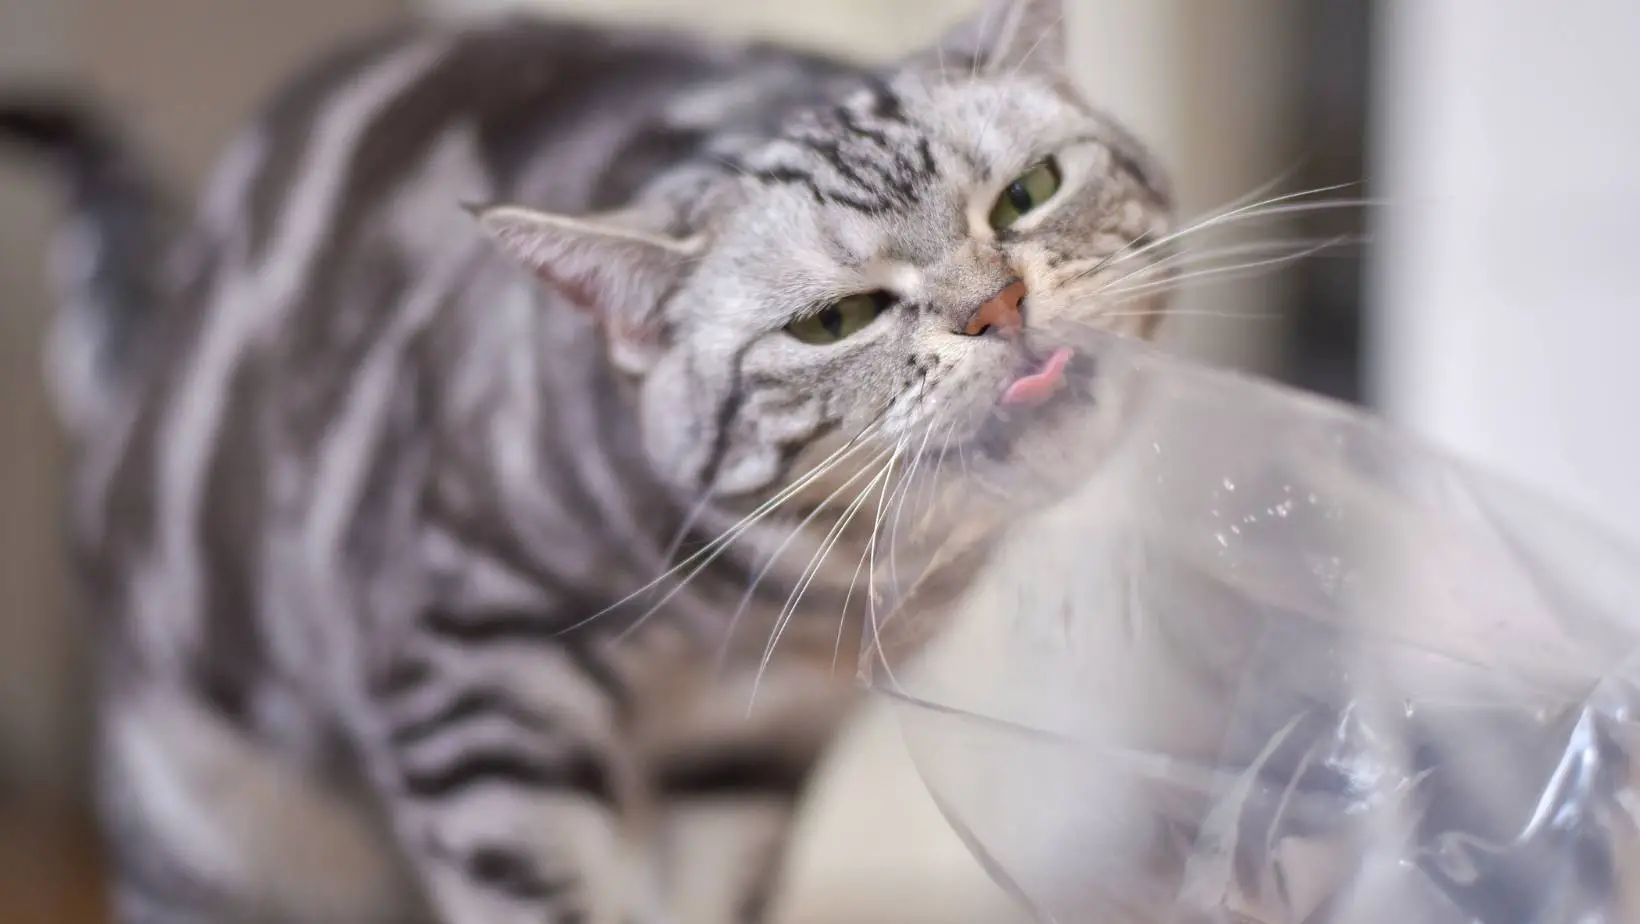 Why Do Cats Lick Plastic Bags?